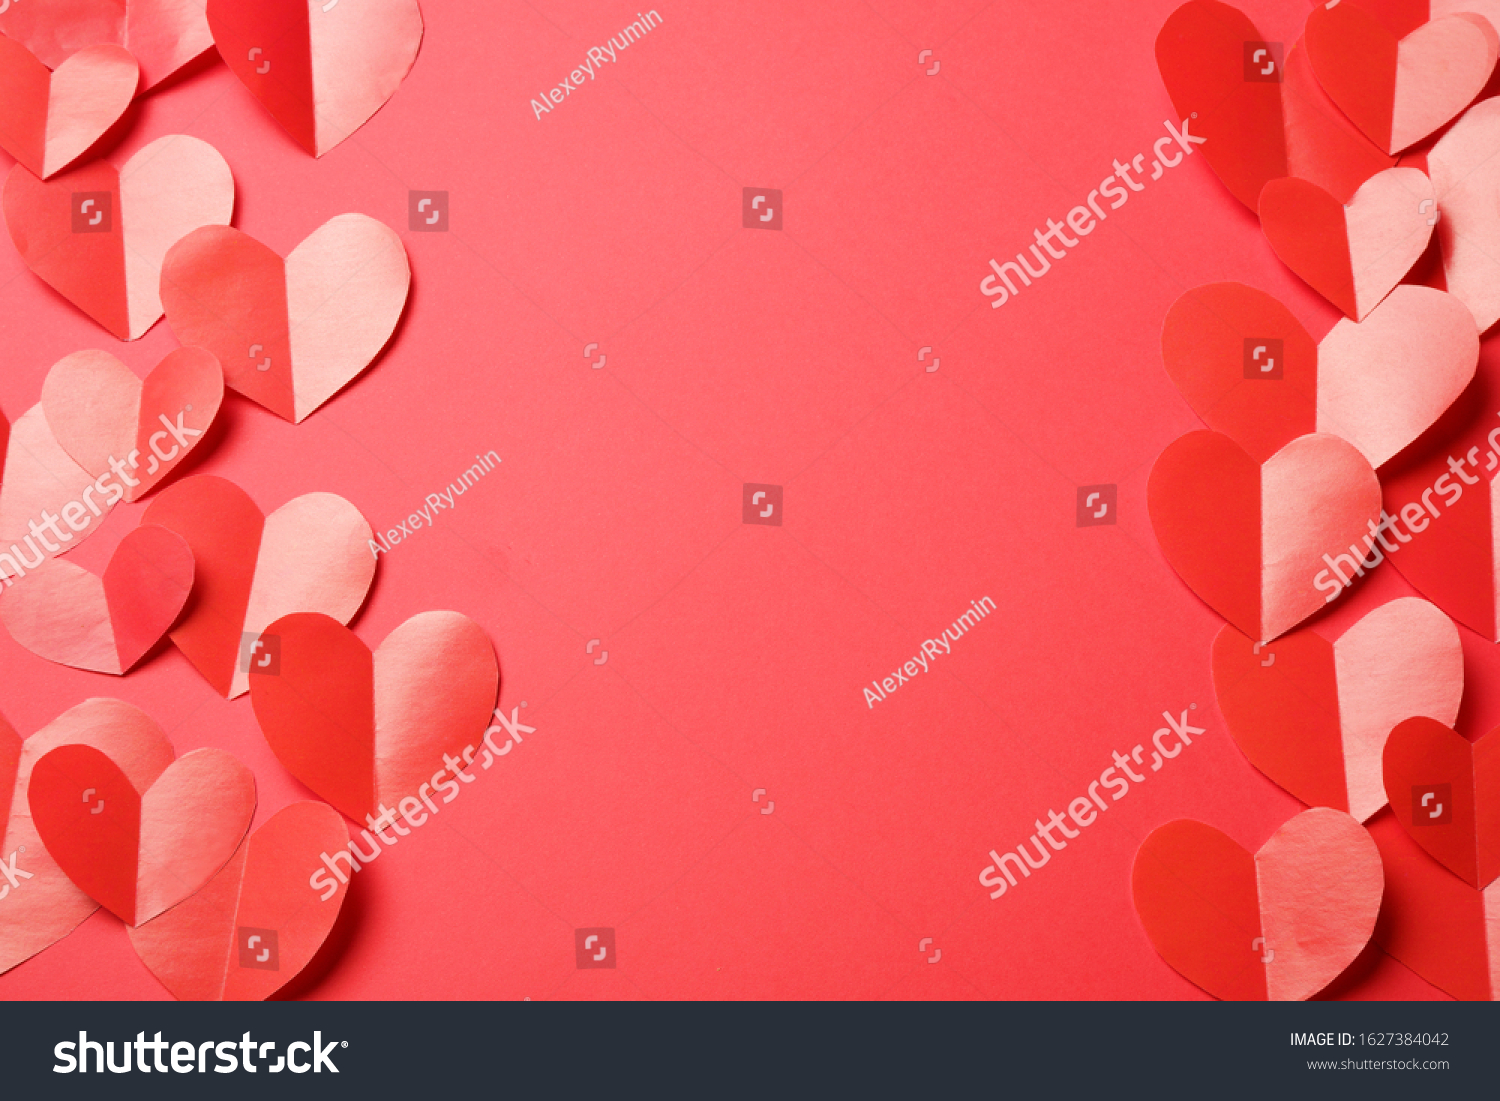 Cut out of red paper hearts on red background. Beautiful Valentines day, Womans day, love, romantic or wedding composition with copy space for your text for banner, congratulation, card, offer, flyer, advertising, invitation.